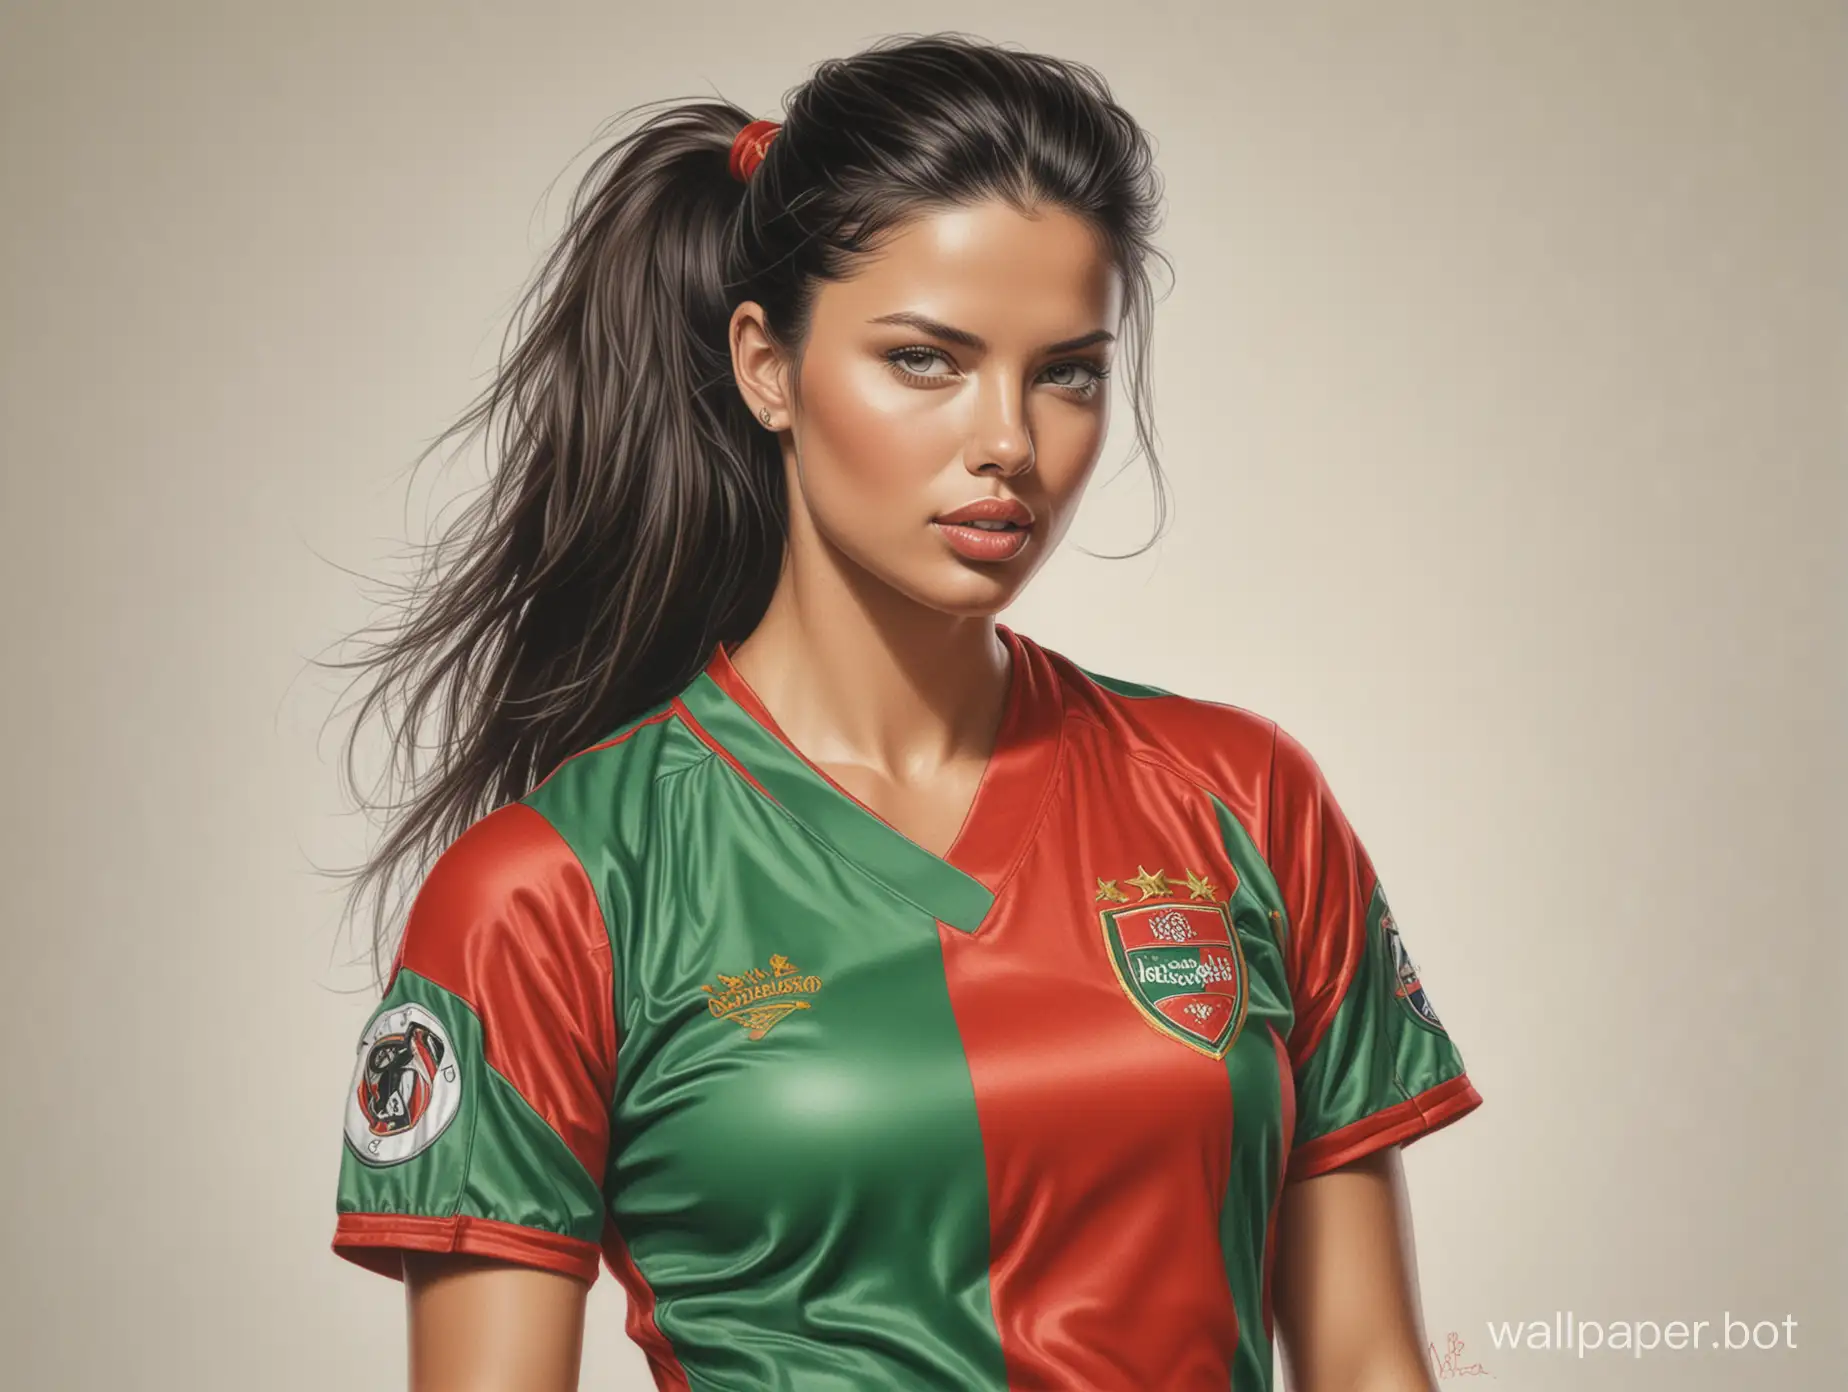 Sketch of Adriana Lima, 25 years old, dark hair styled with a 7th cup size, narrow waist, in a green-red soccer uniform, on a white background, highly realistic drawing in colored pencil, Boris Vallejo style portrait 16K.